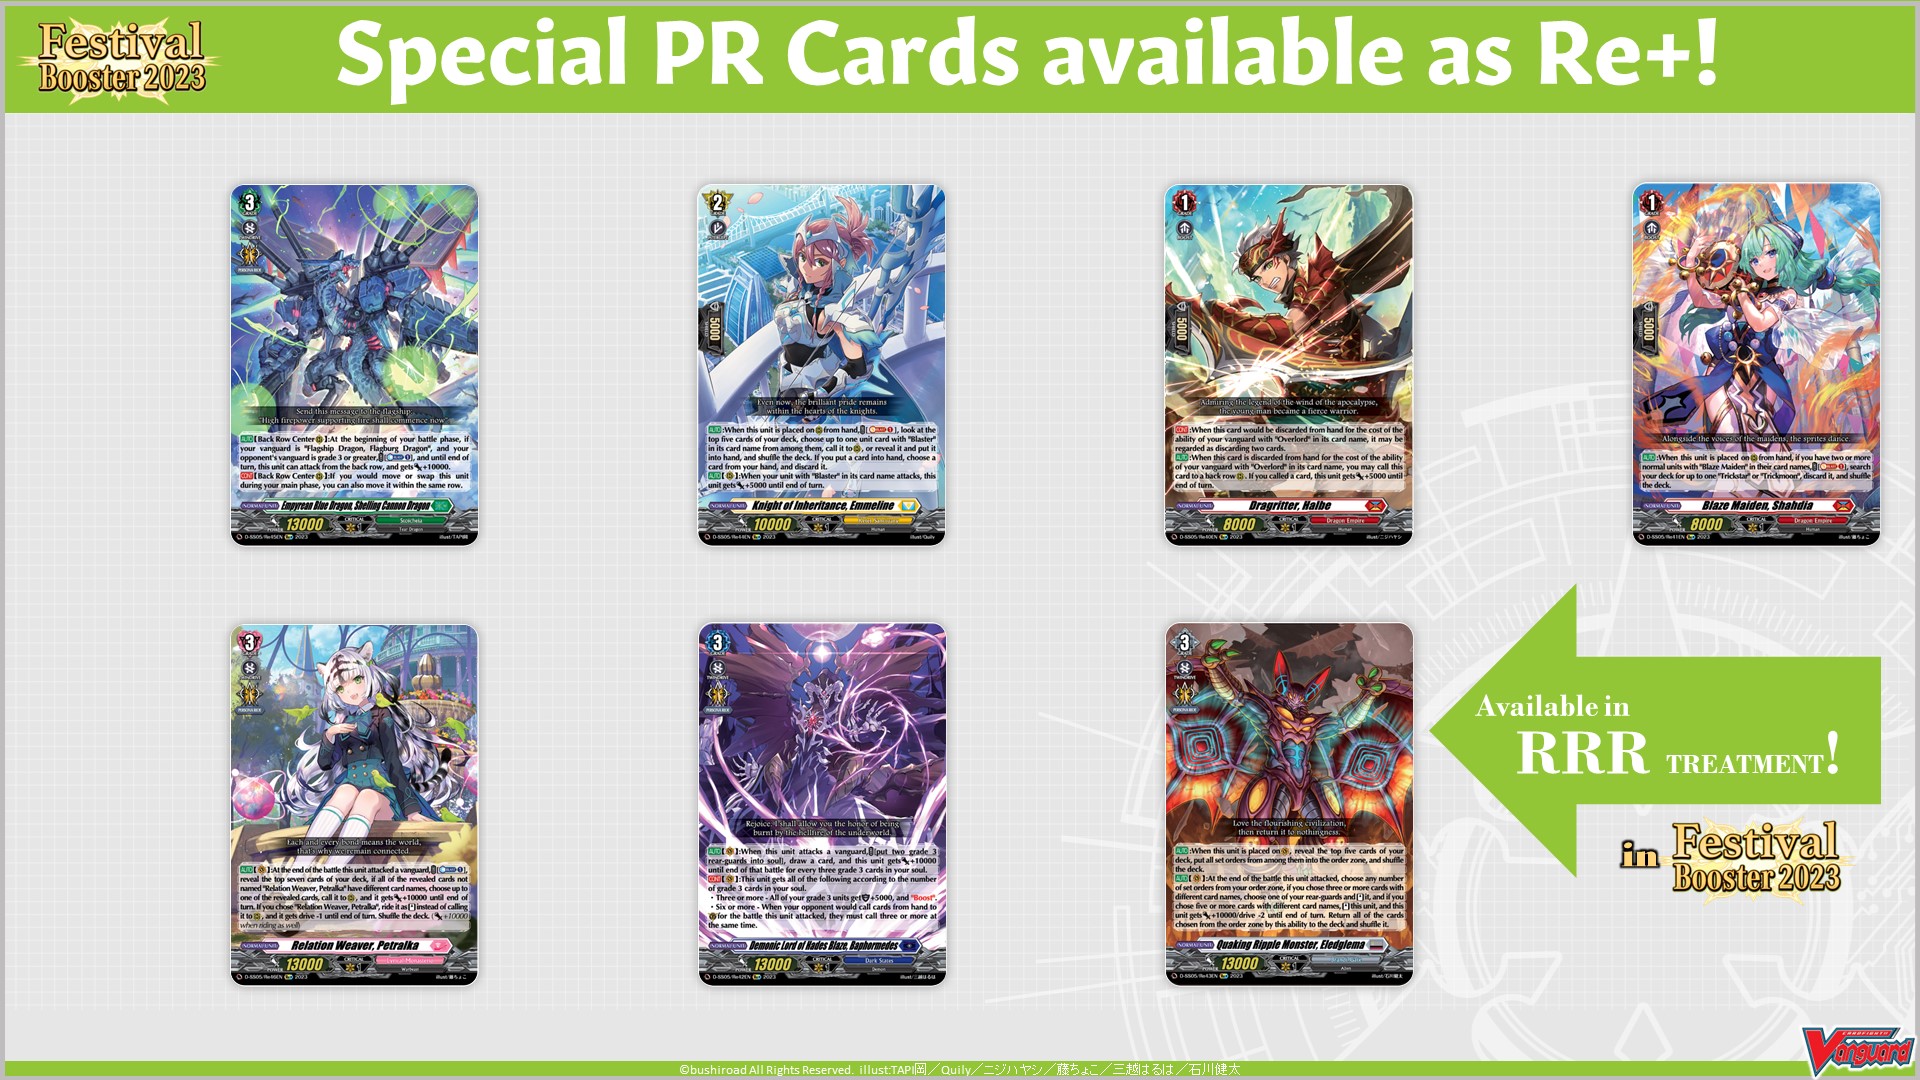 Cardfight!! Vanguard Special Series 05: Festival Booster 2023 